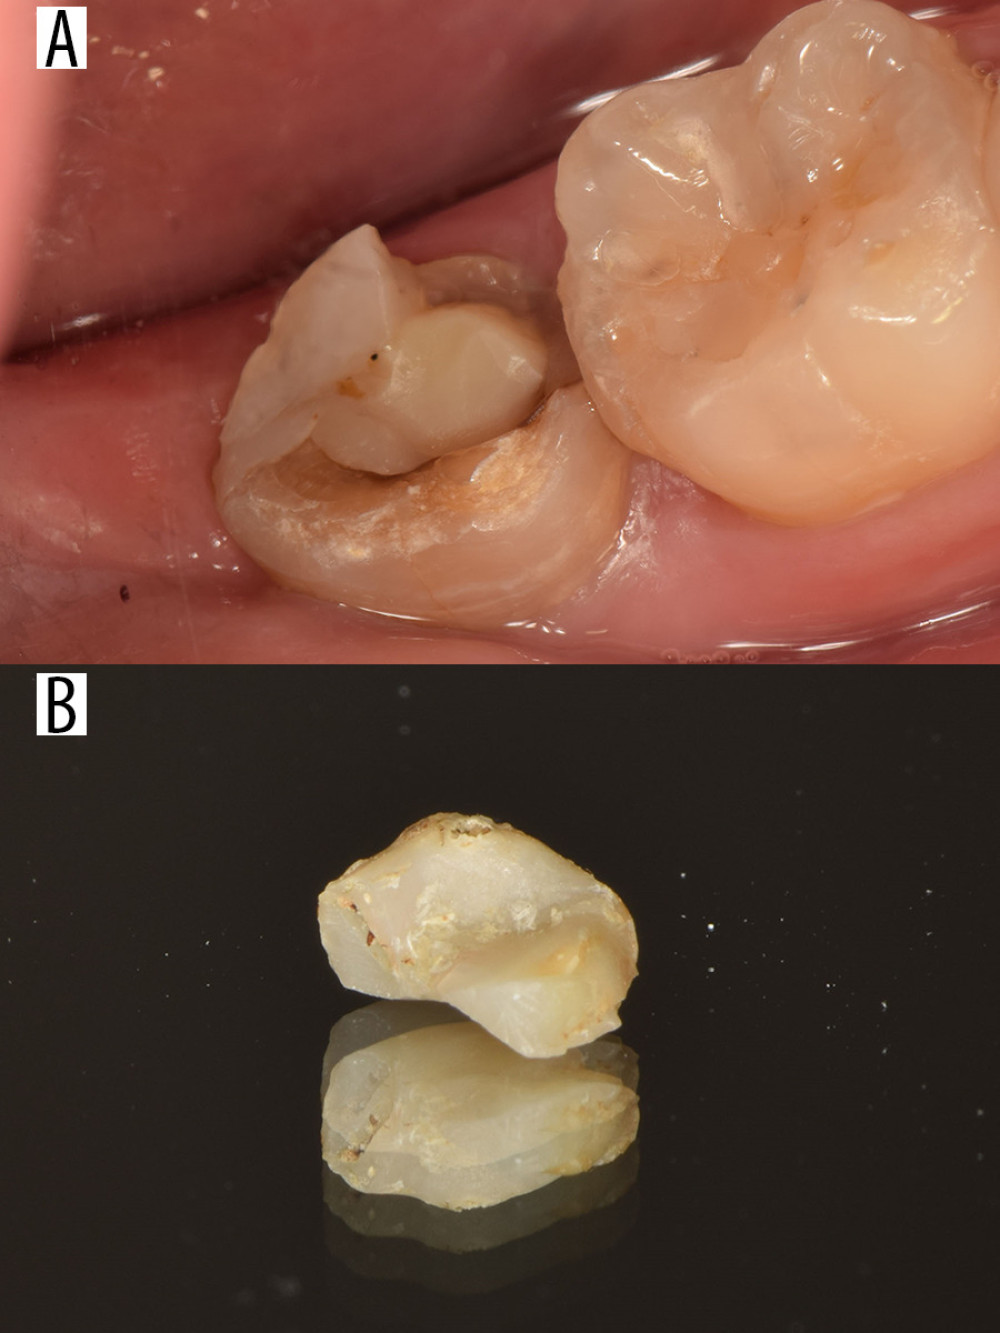 Failed case. Tooth 37 was restored with a resin nanoceramic (RNC) onlay, which fractured after 35 months. (A) Intraoral photograph of the onlay, which fractured after 35 months. (B) Photograph of the fractured onlay.